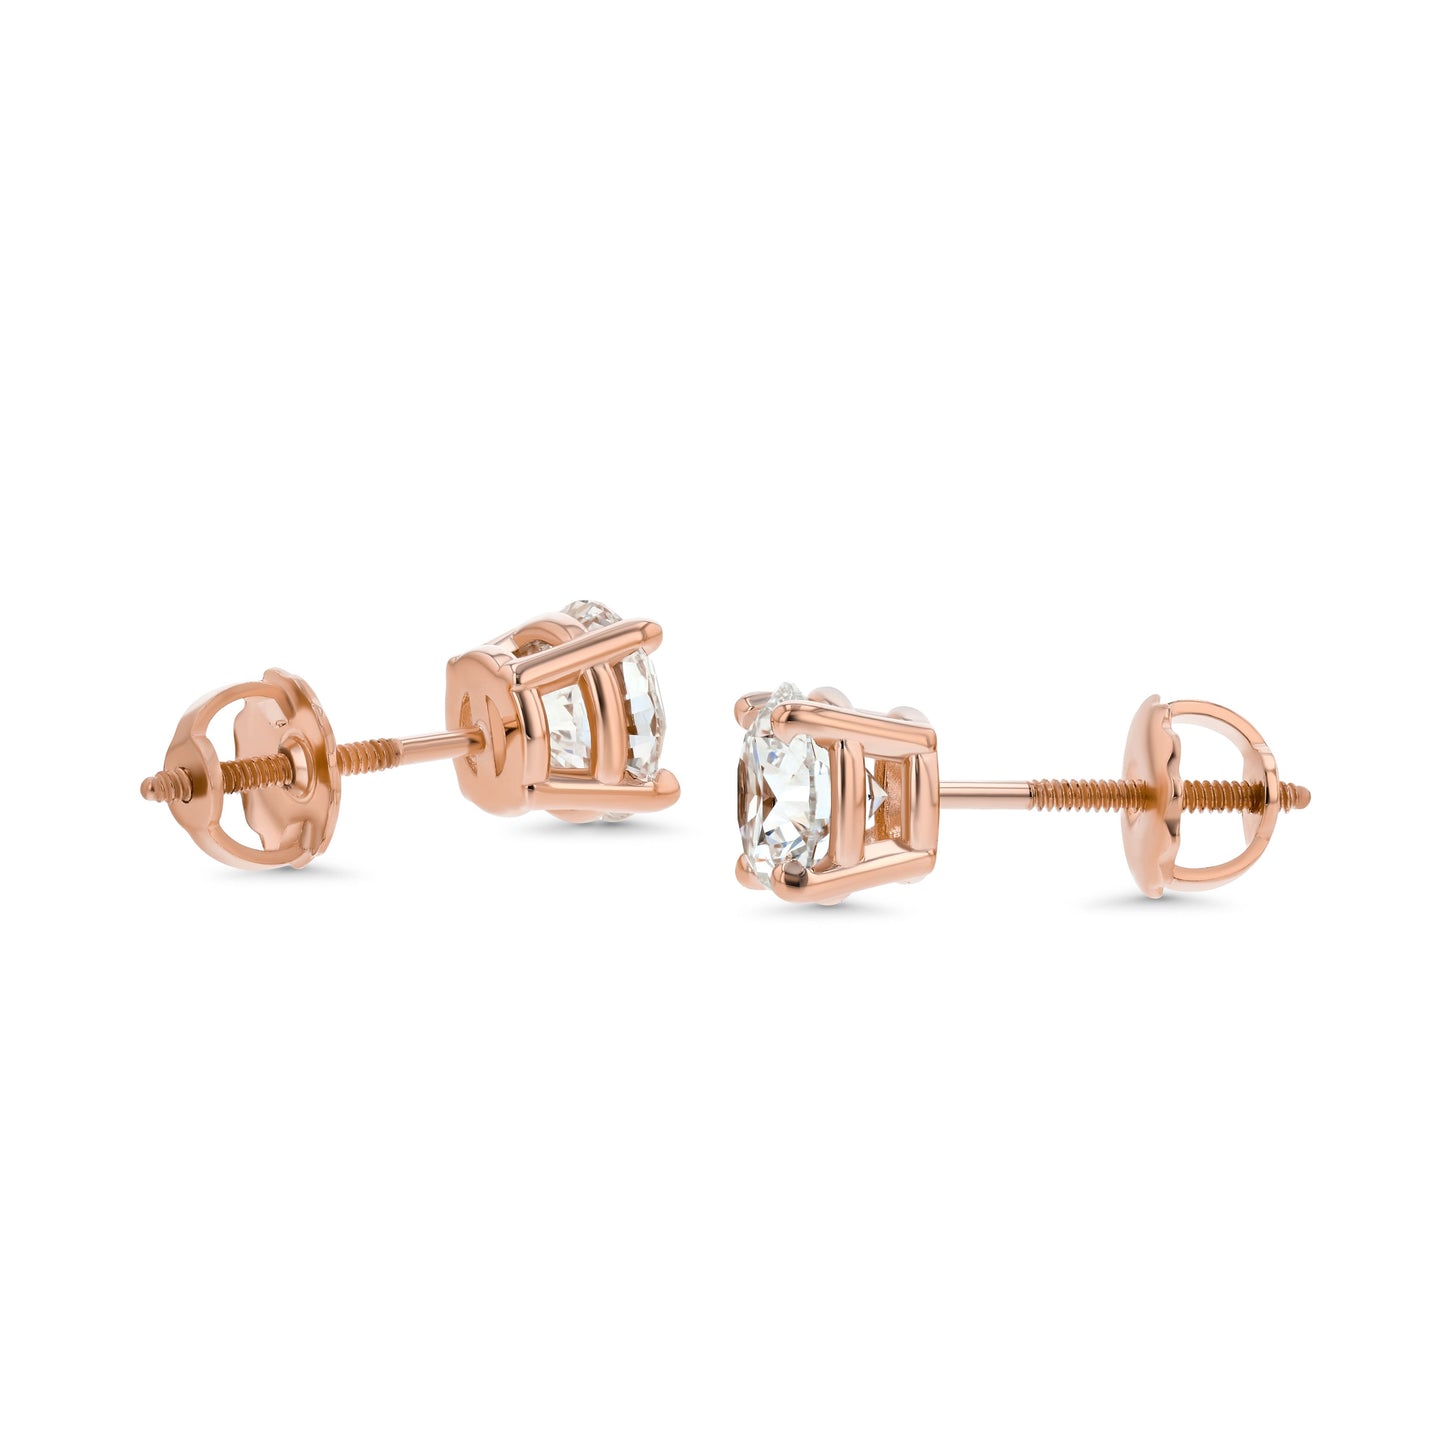 14k Rose Gold 4-prong Round Brilliant Diamond Stud Earrings (1 Ct. T.w., Si1-si2 Clarity, J-k Color)